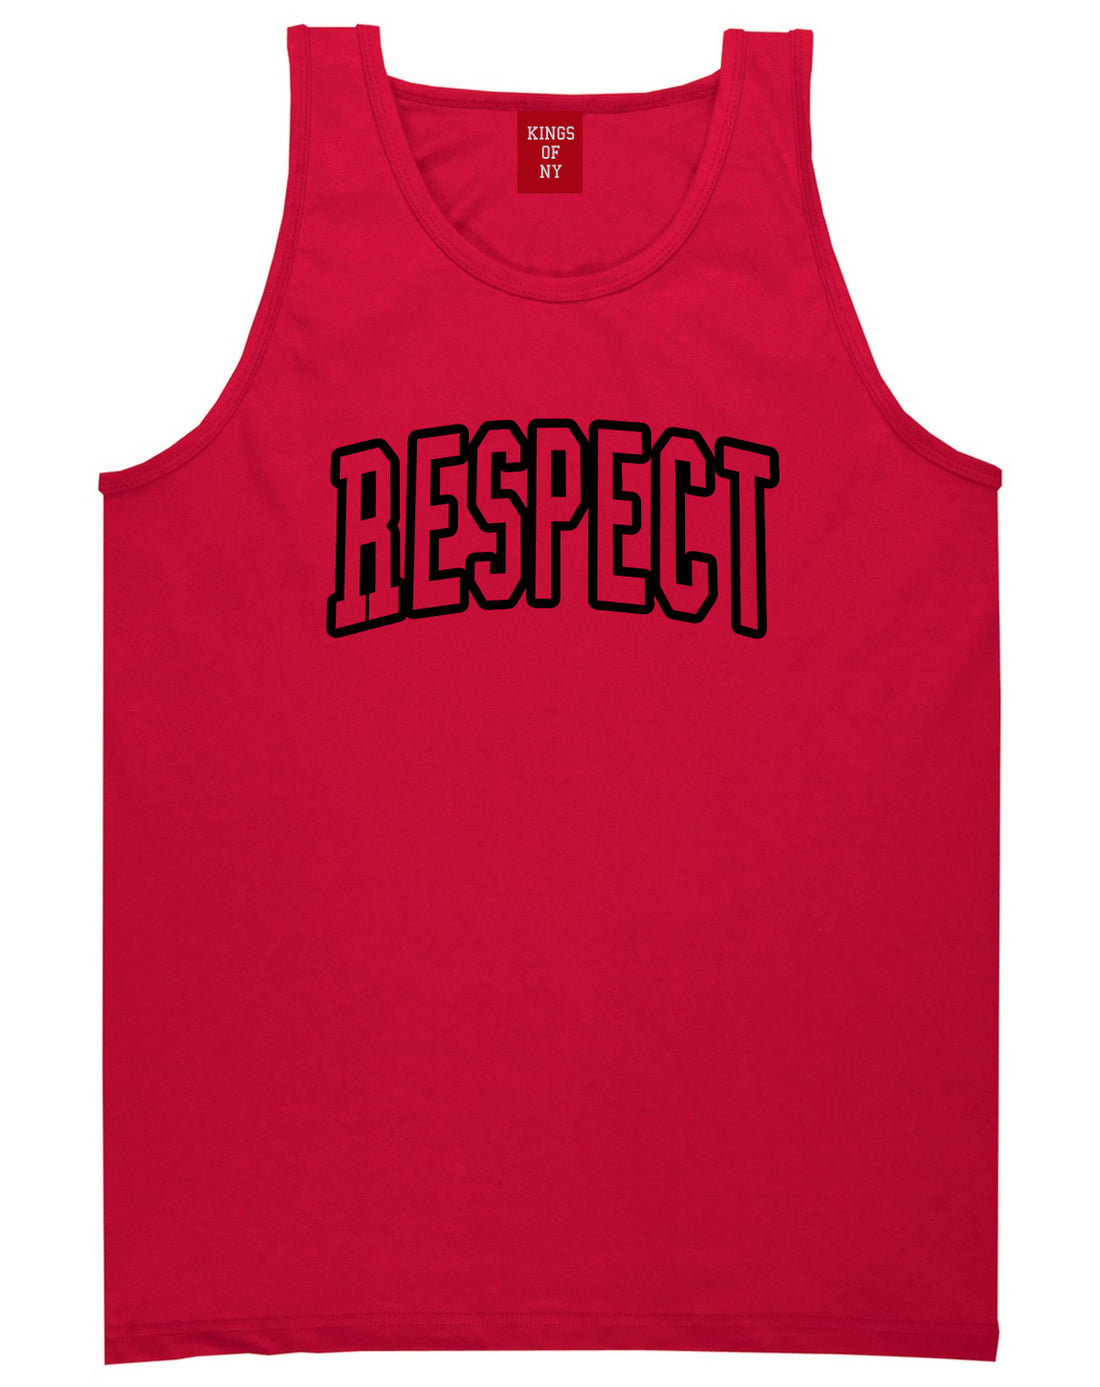 Respect Outline Mens Tank Top T-Shirt Red